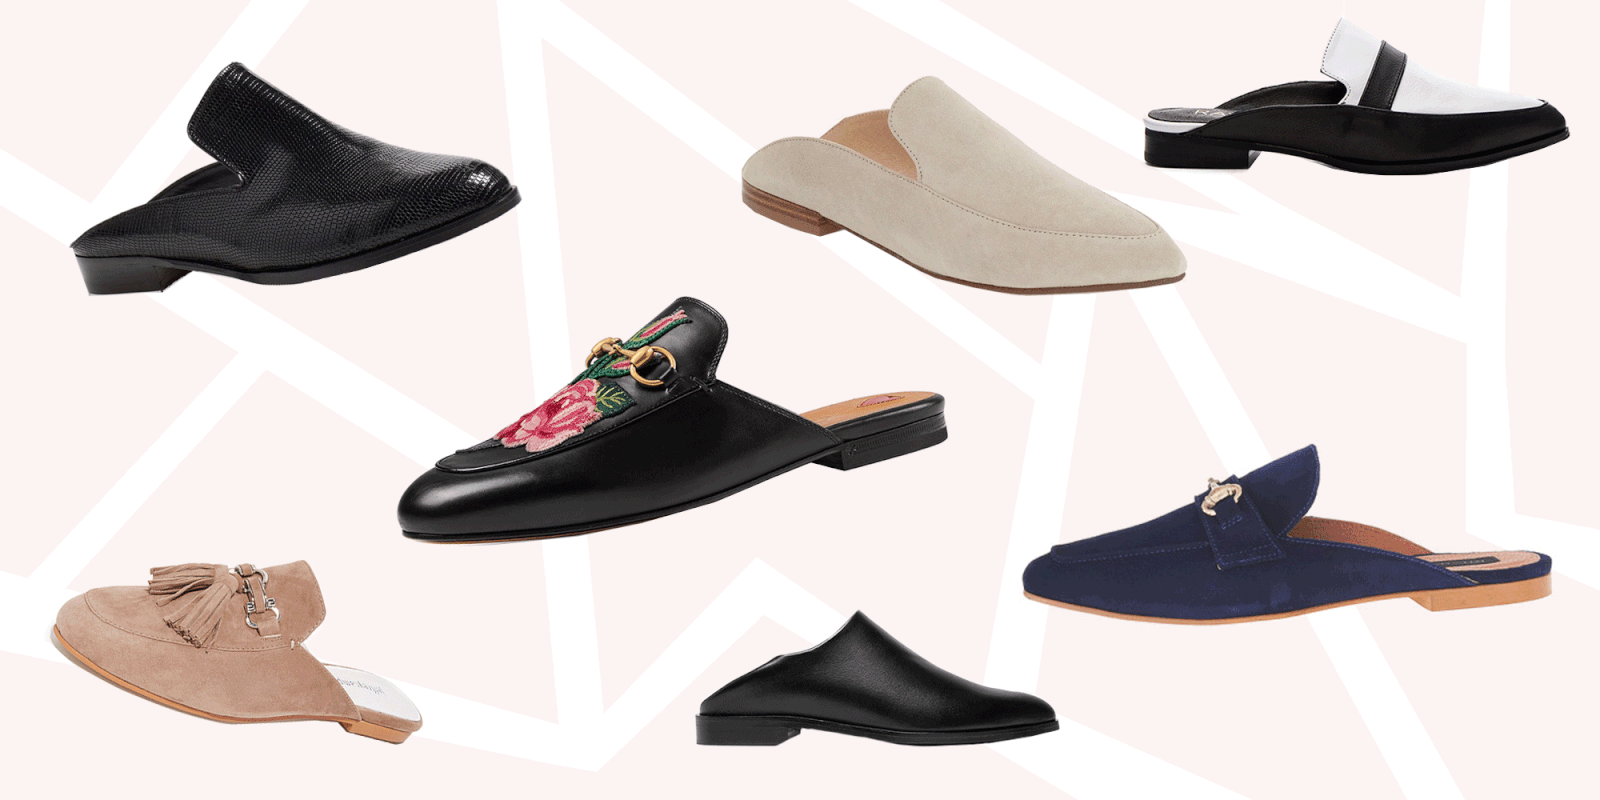 Style Trends in Shoes for Women | Footwear Guide